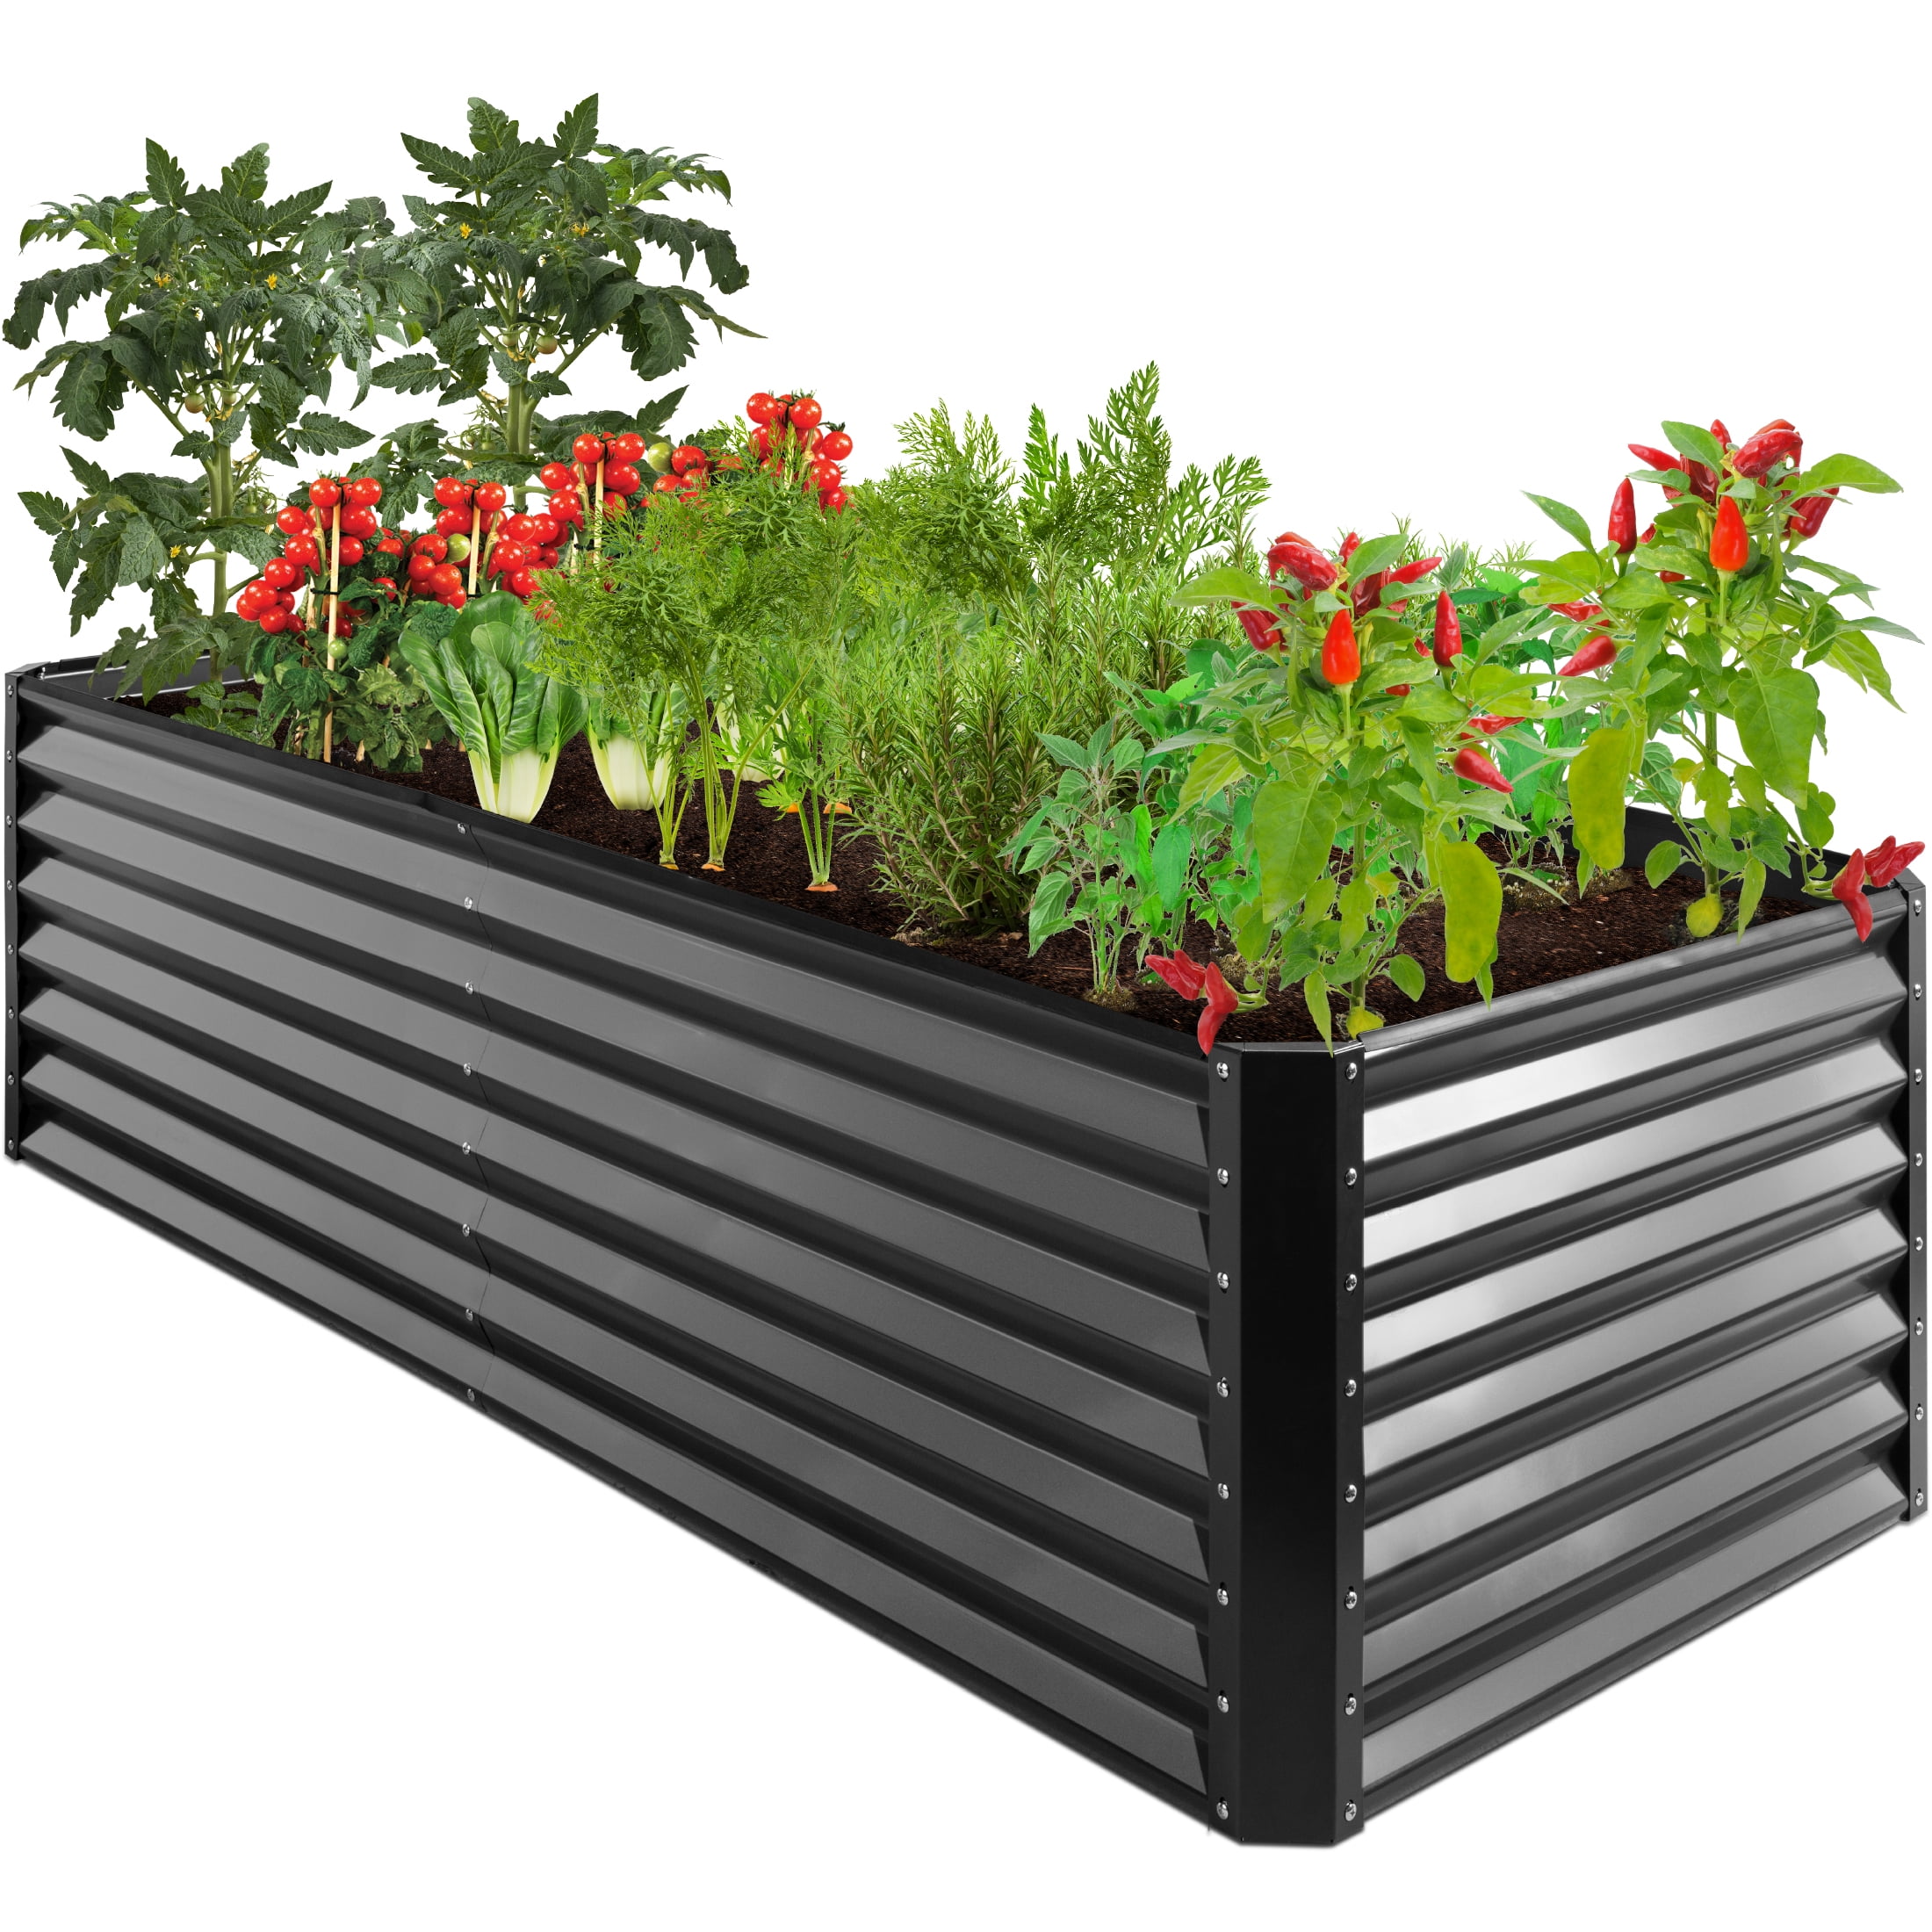 Image of Best Choice Products outdoor metal raised garden bed image 4